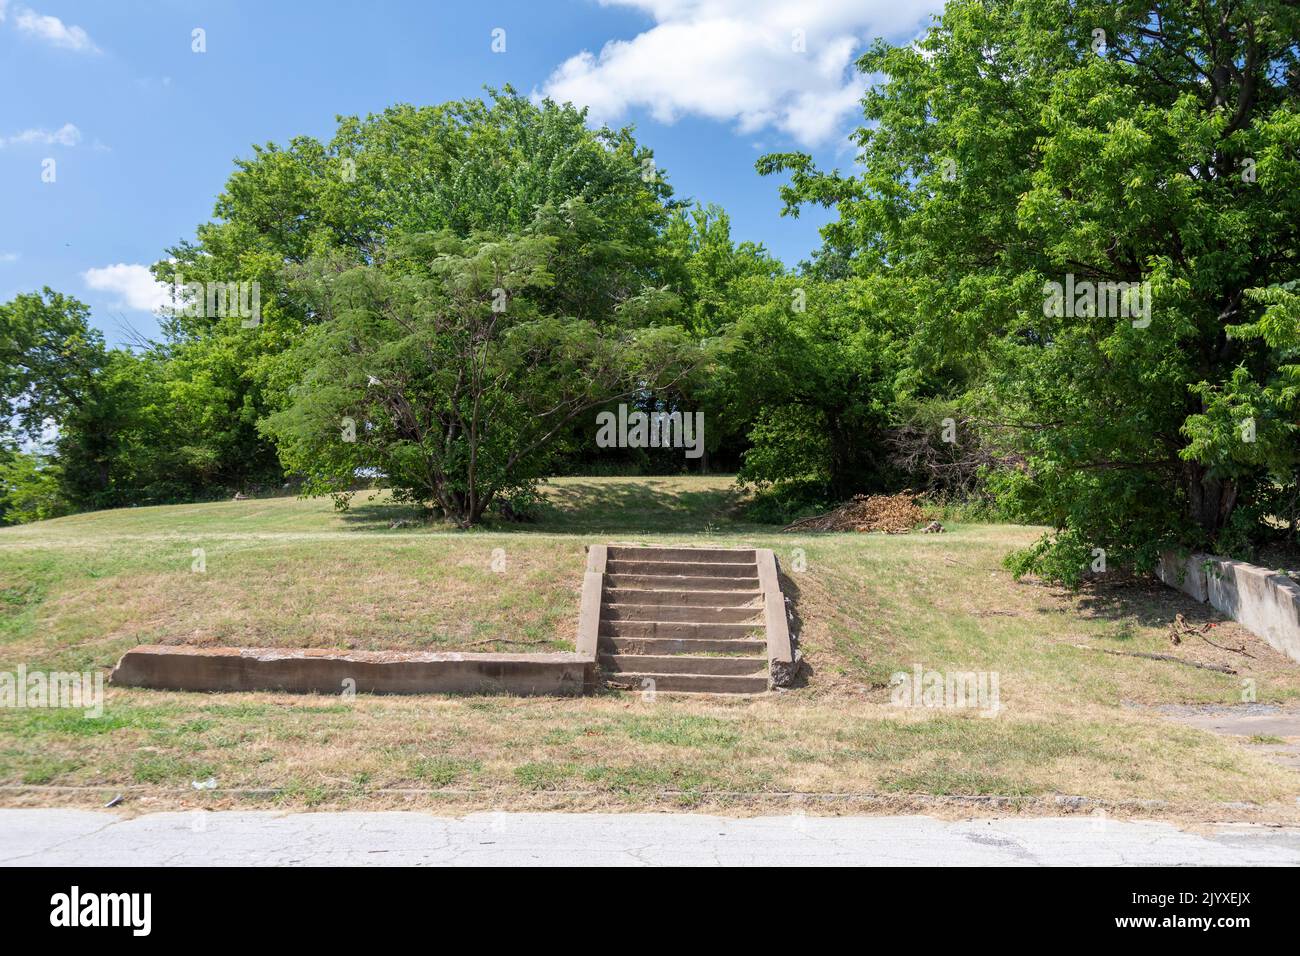 Tulsa, Oklahoma - The 'Steps to Nowhere' in a neighborhood not far from the site of the 1921 race massacre, only to be bulldozed by urban renewal, mos Stock Photo